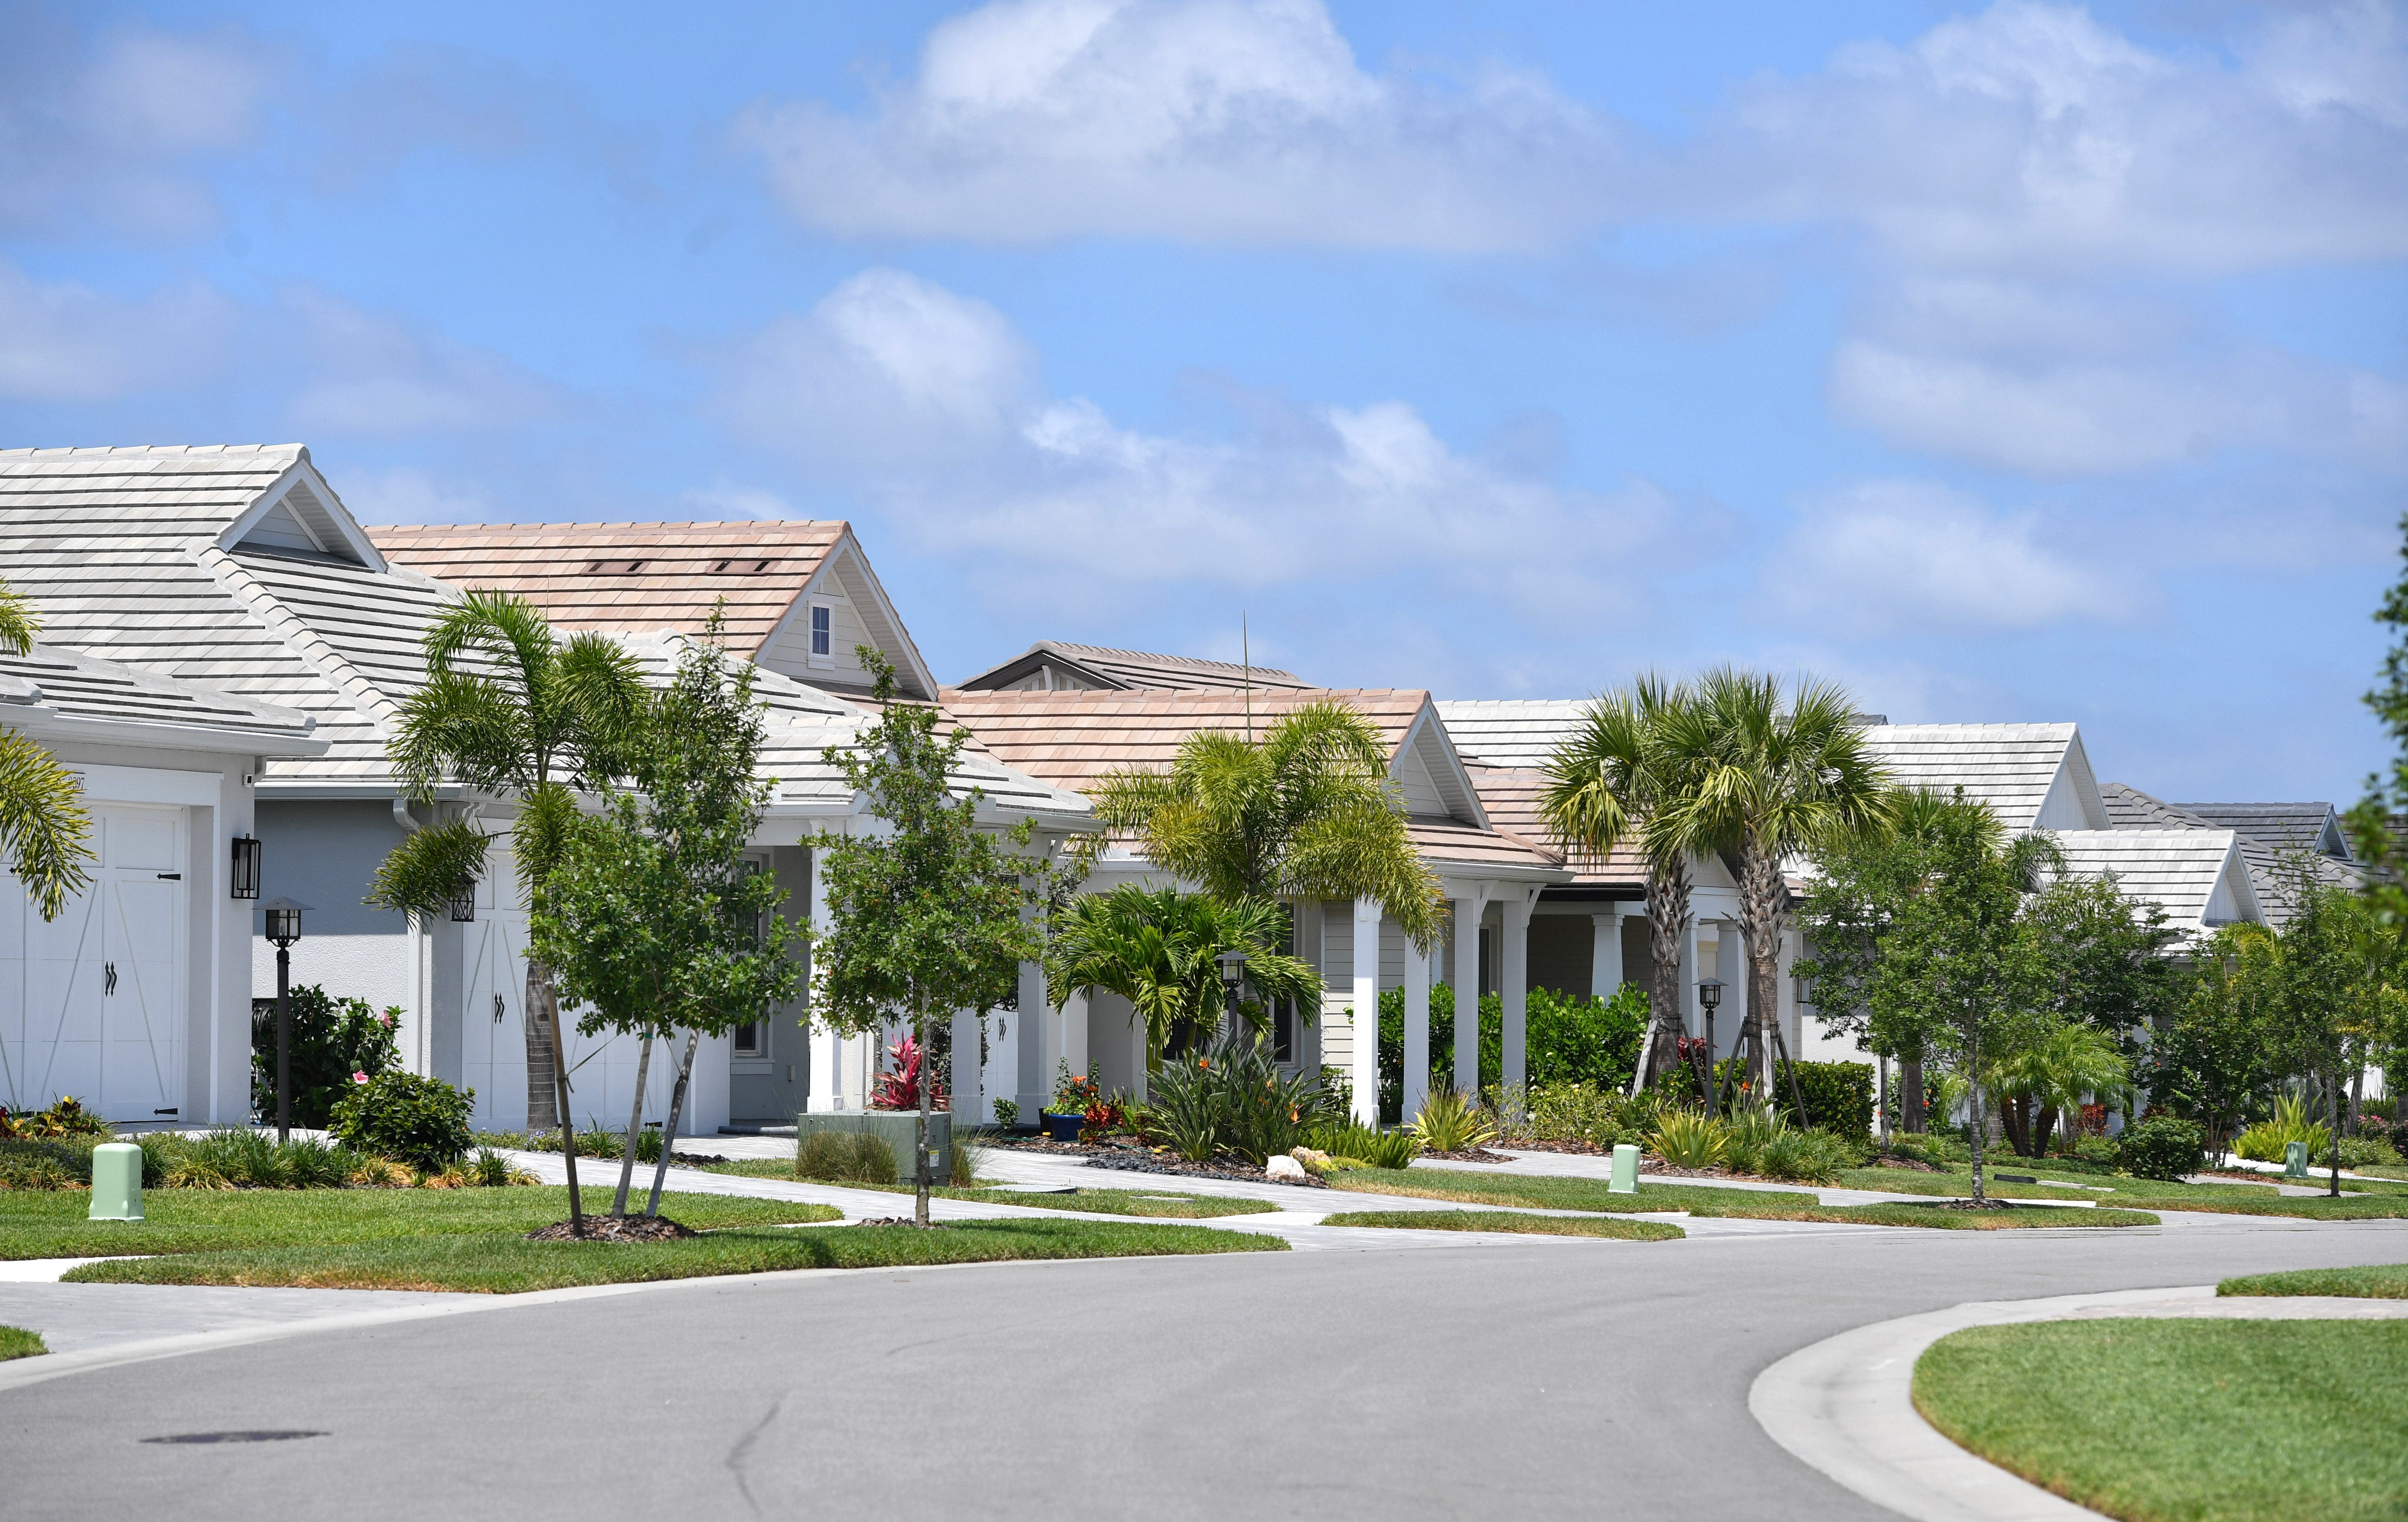 Redfin hypes Sarasota-Bradenton real estate as overvalued, but local agents don't see that